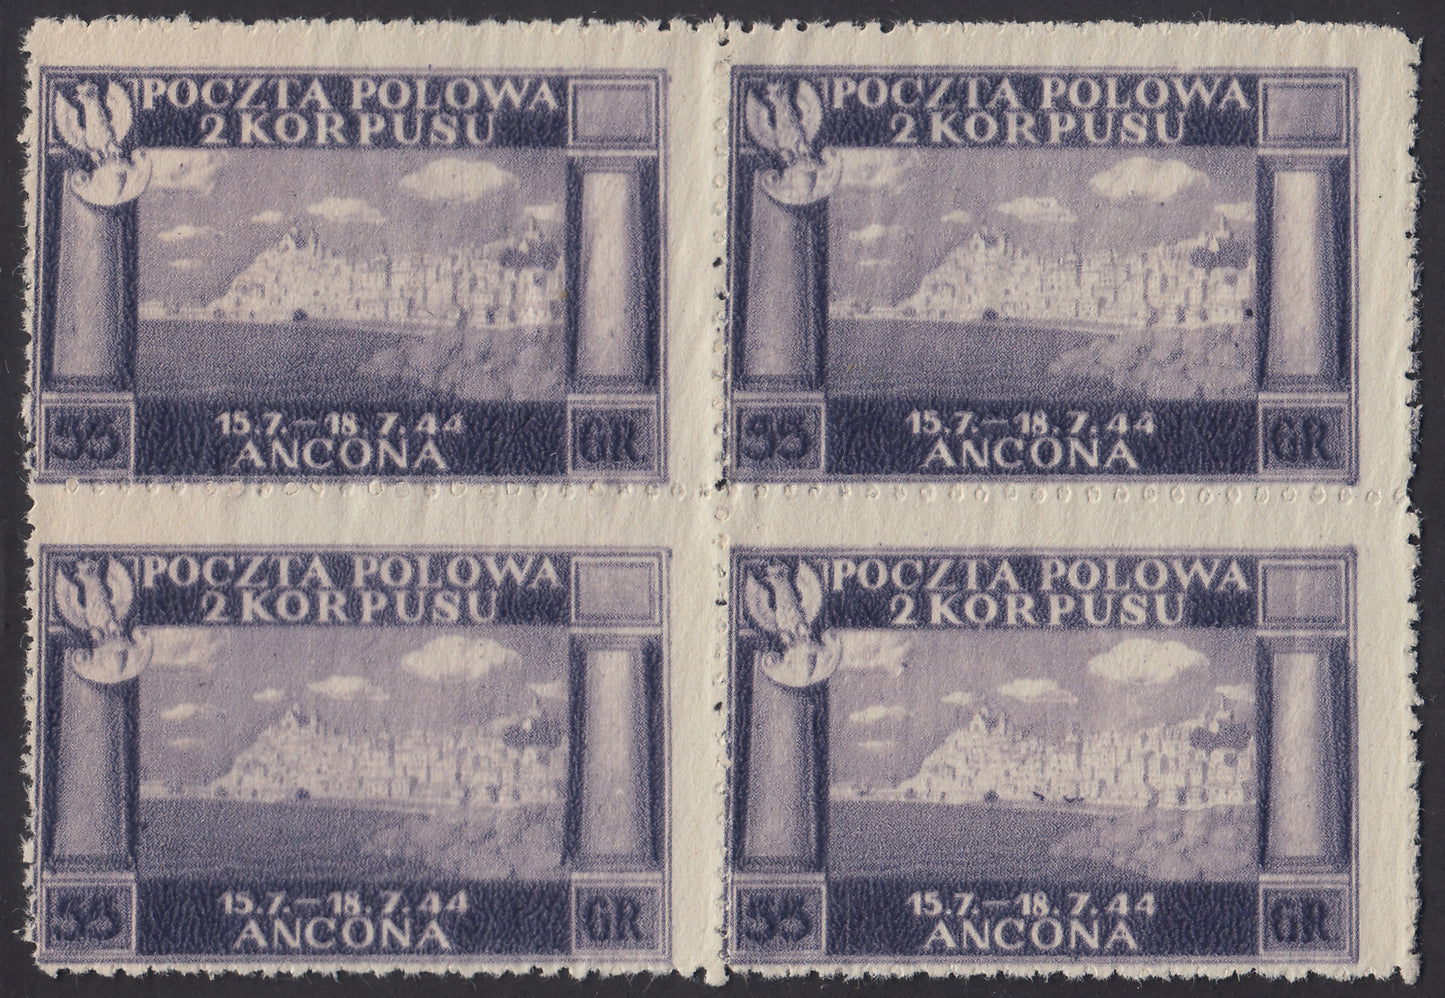 CP145 - 1946 - Polish Corps, Polish victories in Italy series on yellowish, thick, poor quality paper, different color 55g. violet in new, ungummed block (6A/I)